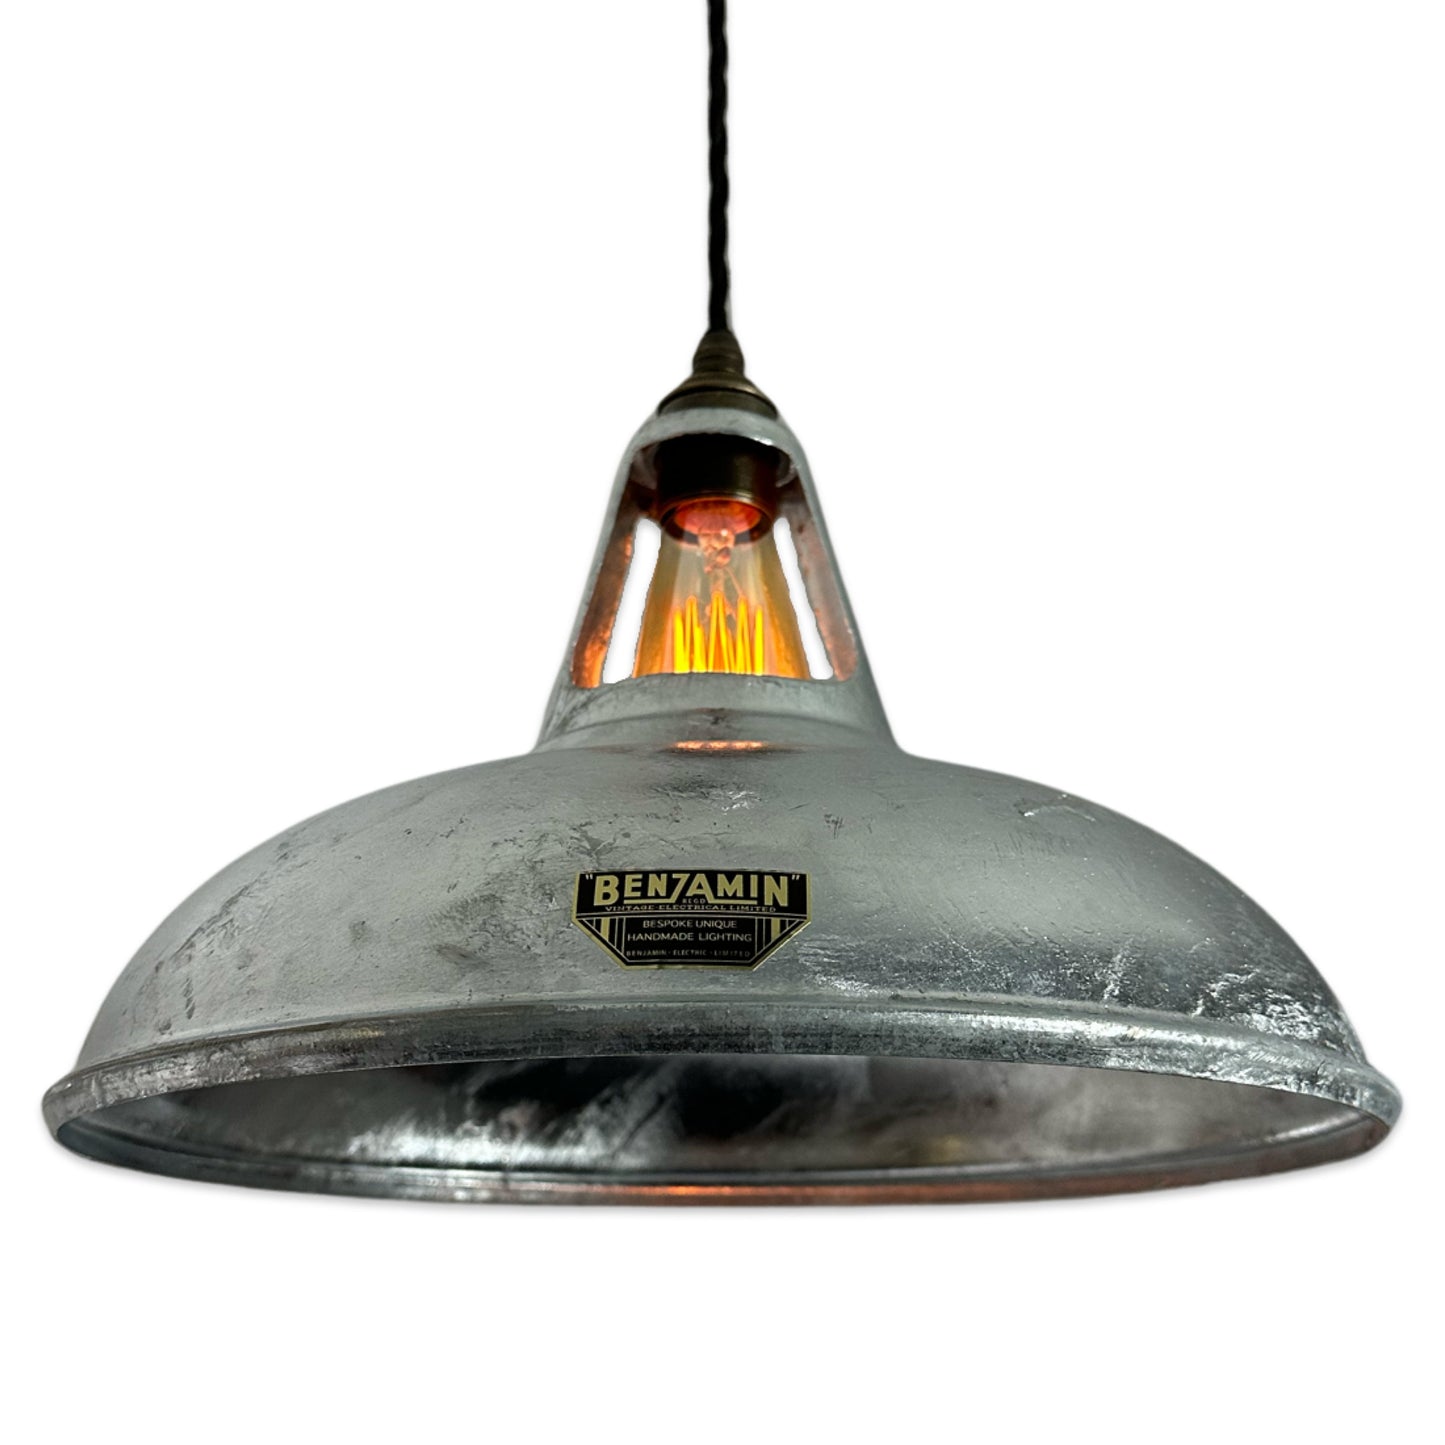 Cawston XL ~ Galvanised Solid Steel Shade Slotted Design Pendant Set Light ~ 14 Inch